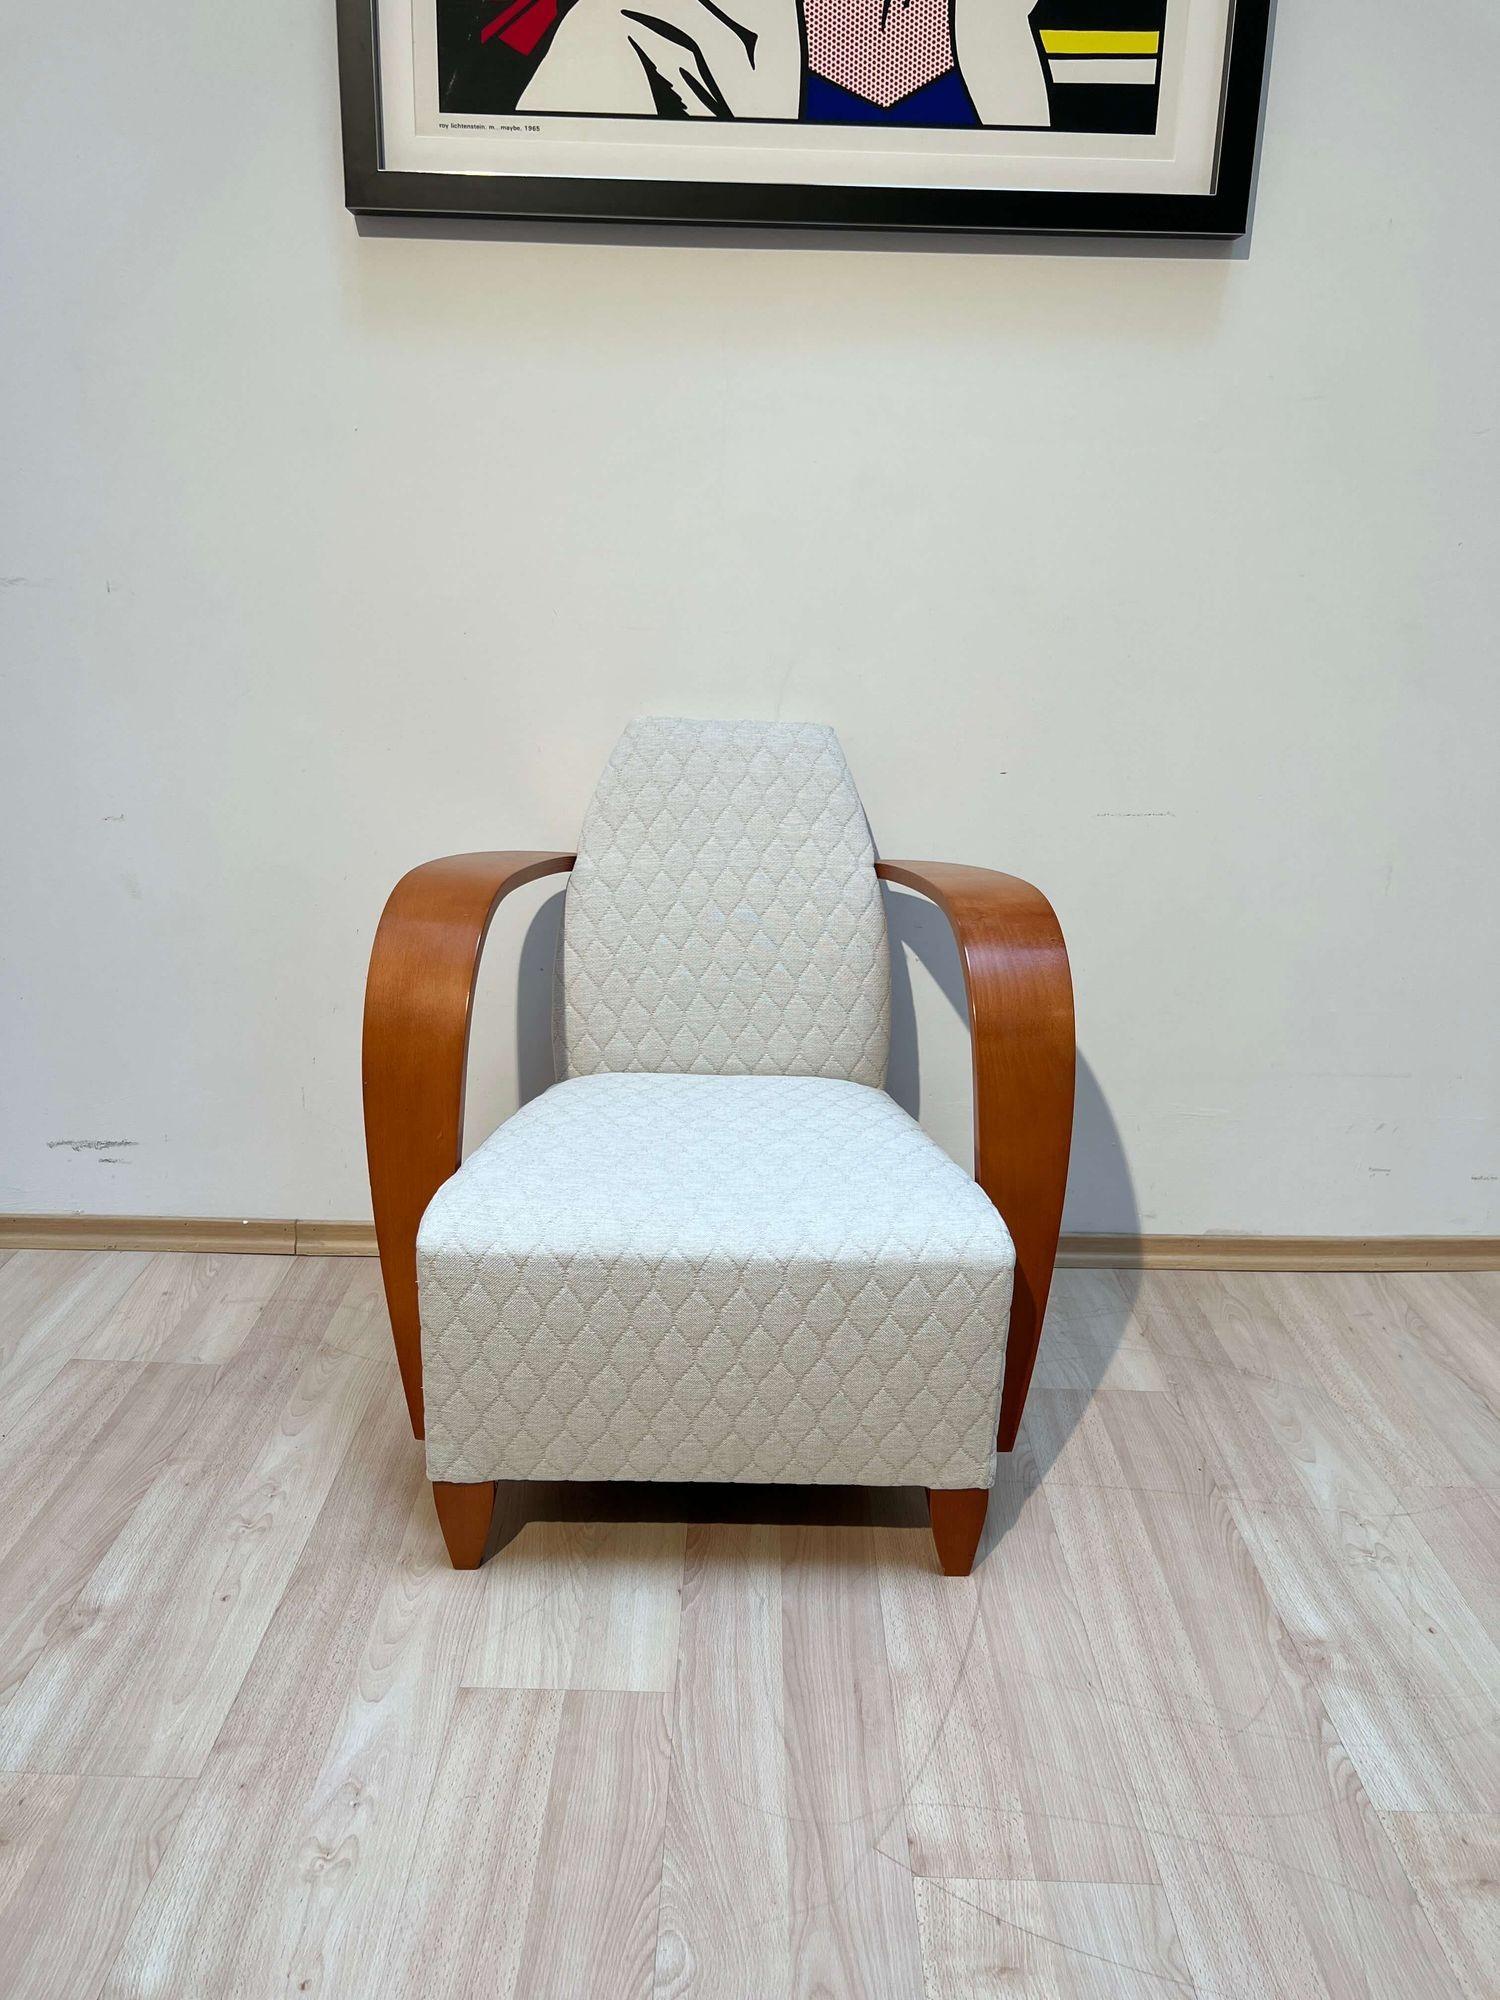 Elegant vintage design armchair, club or lounge chair from Spain, late 1990s.
Manufacturer: Andreu World SA, Spain.
Strongly curved, high armrests in beech plywood. Conical legs in solid beech. Solid beech frame.
Newly upholstered with cream-white